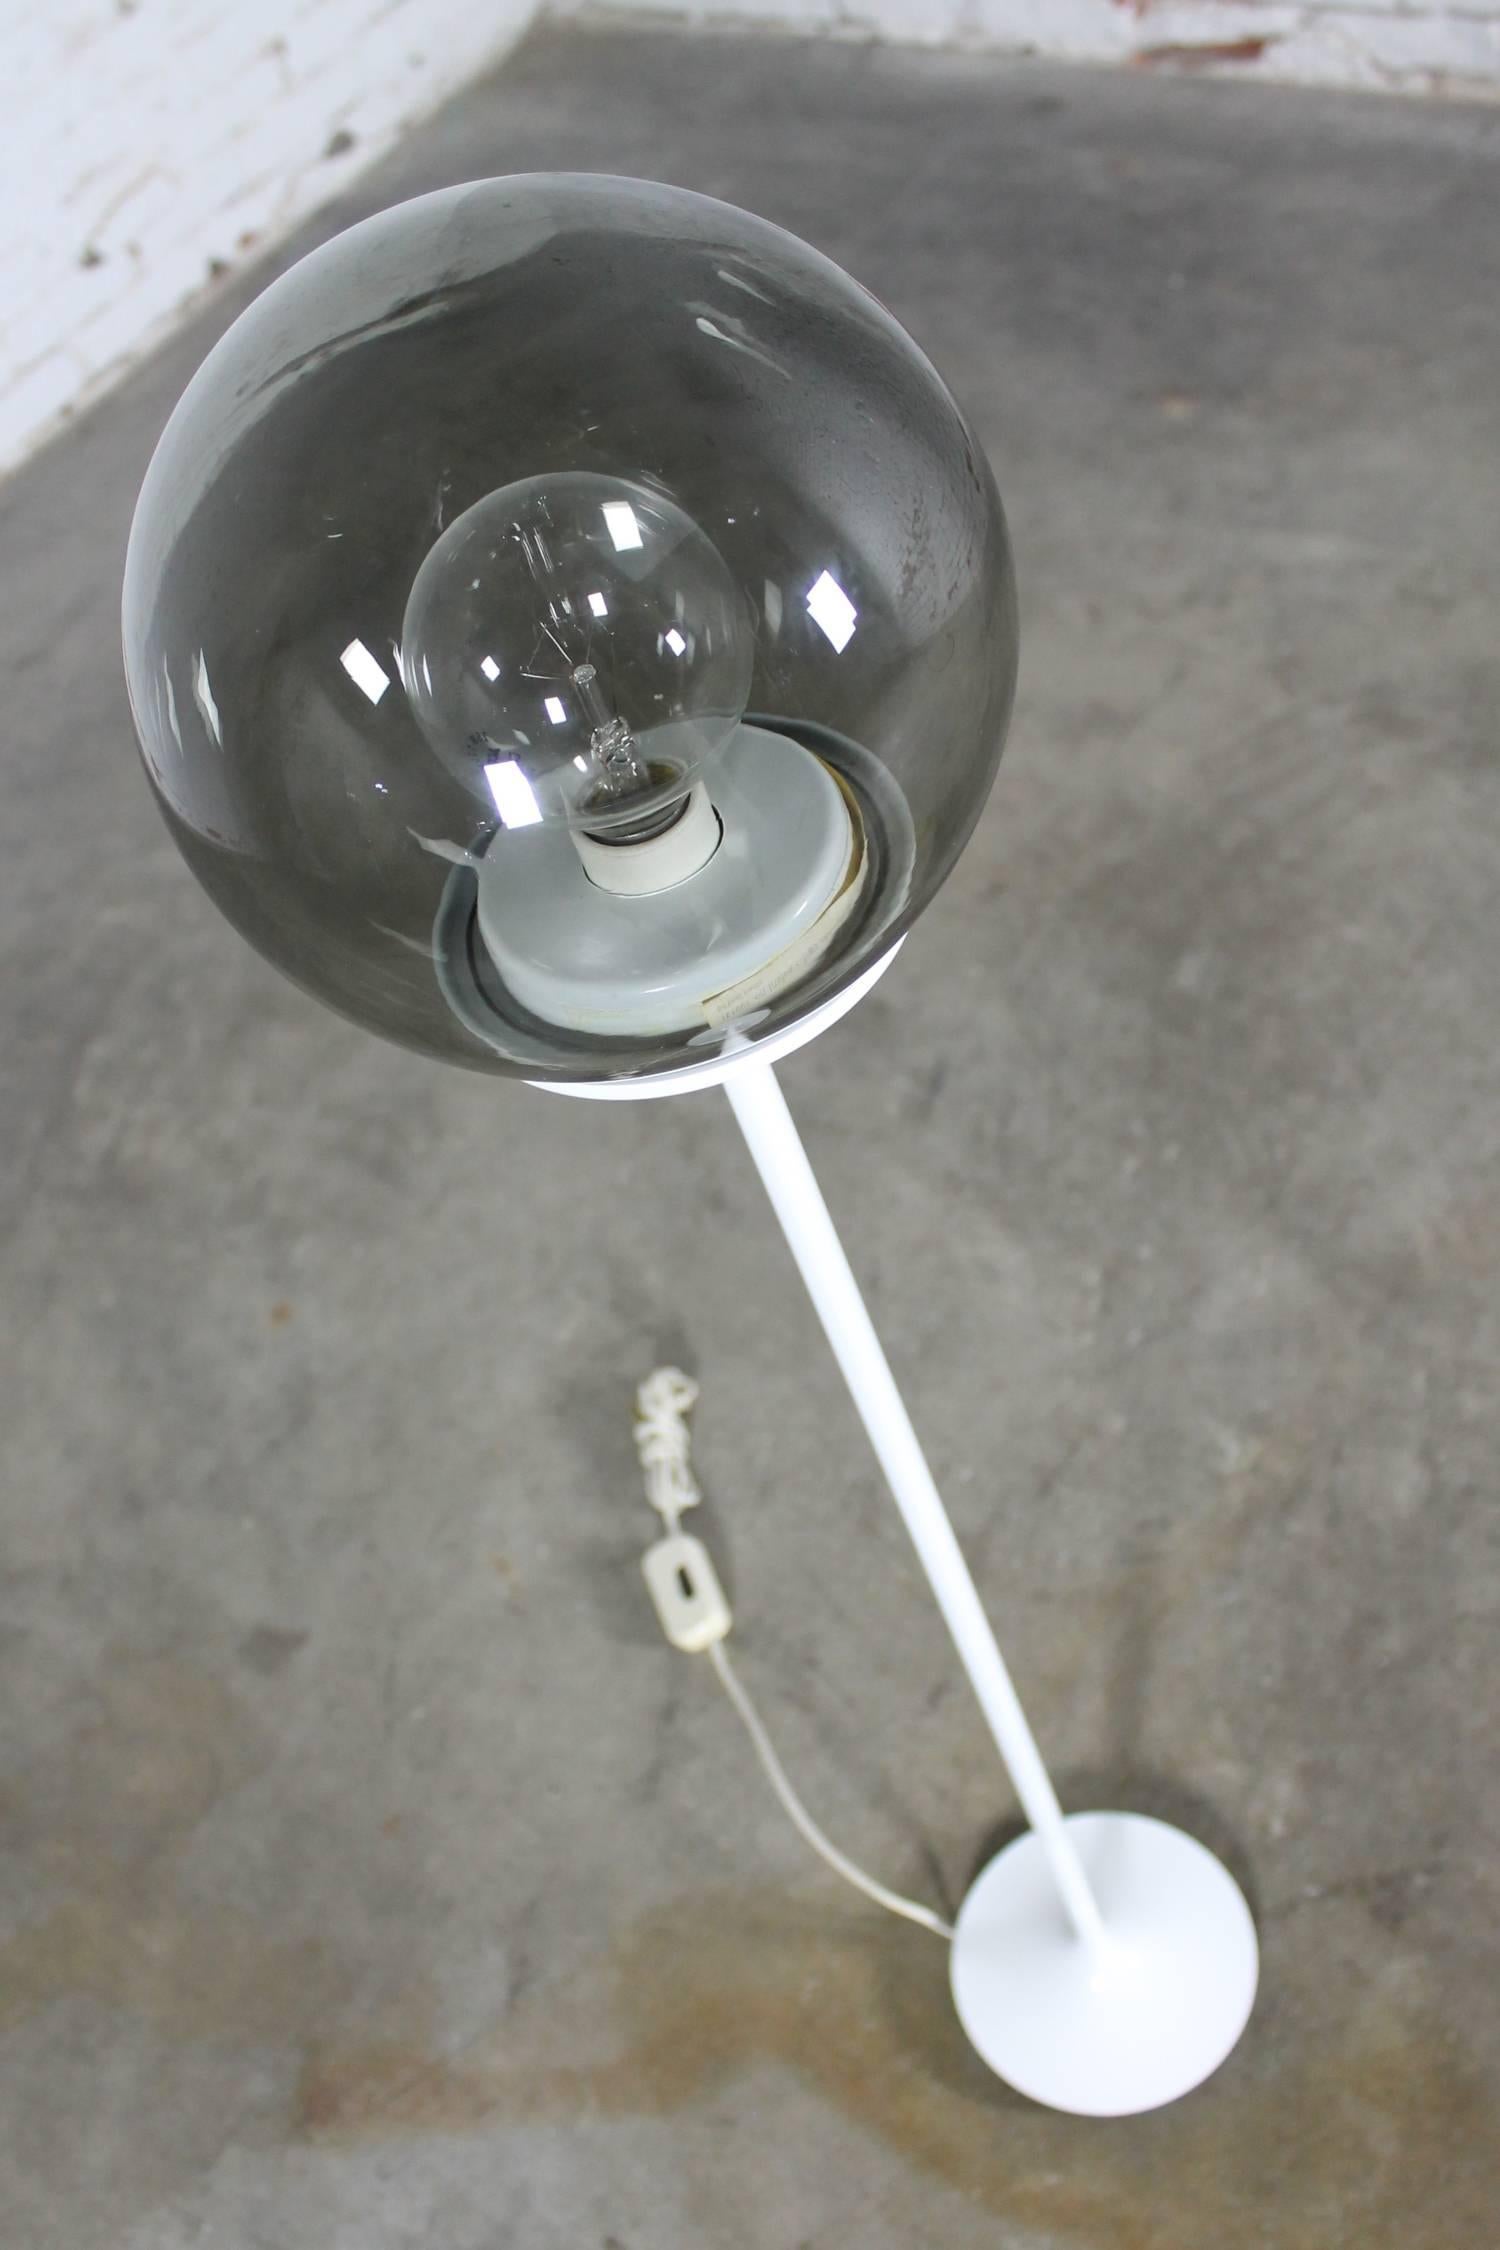 Mid-Century Modern Stemlite Floor Lamp by Billy Curry for Design Line White with Smoke Glass Globe